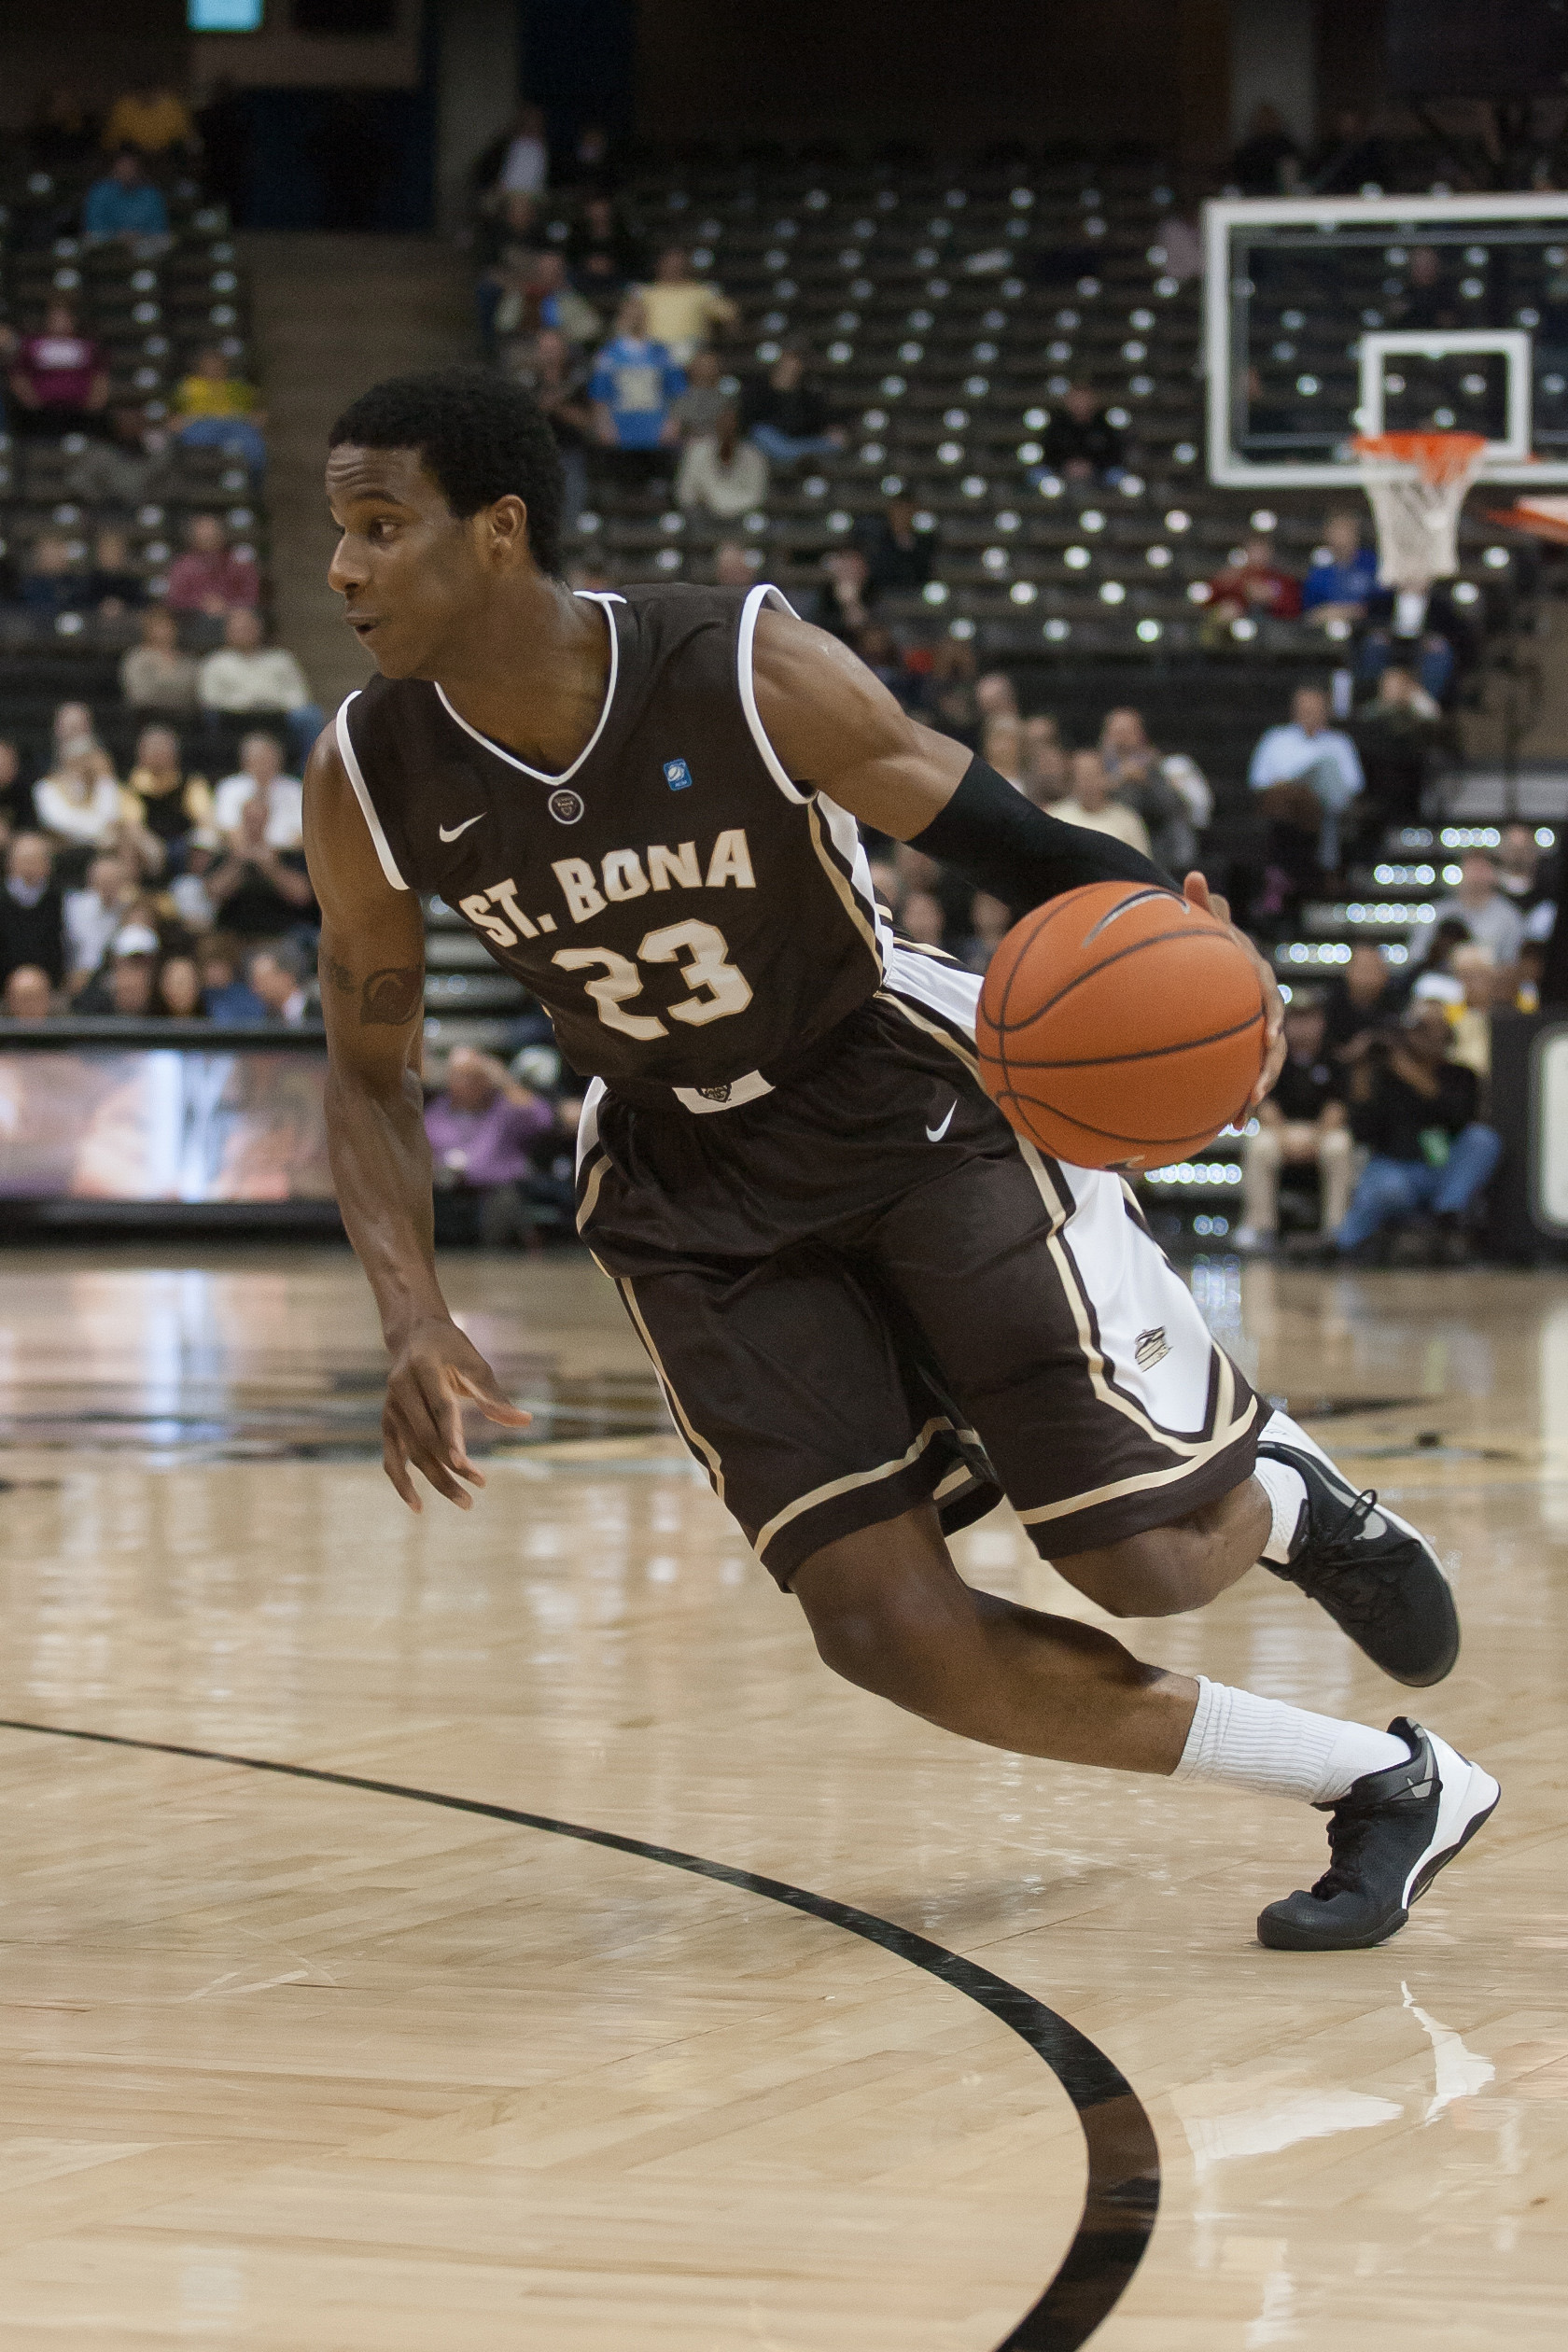 St. Bonaventure Guard Andell Cumberbatch scored 17 points in the victory against the Saint Louis Billikens on Wednesday, March 4th, 2015